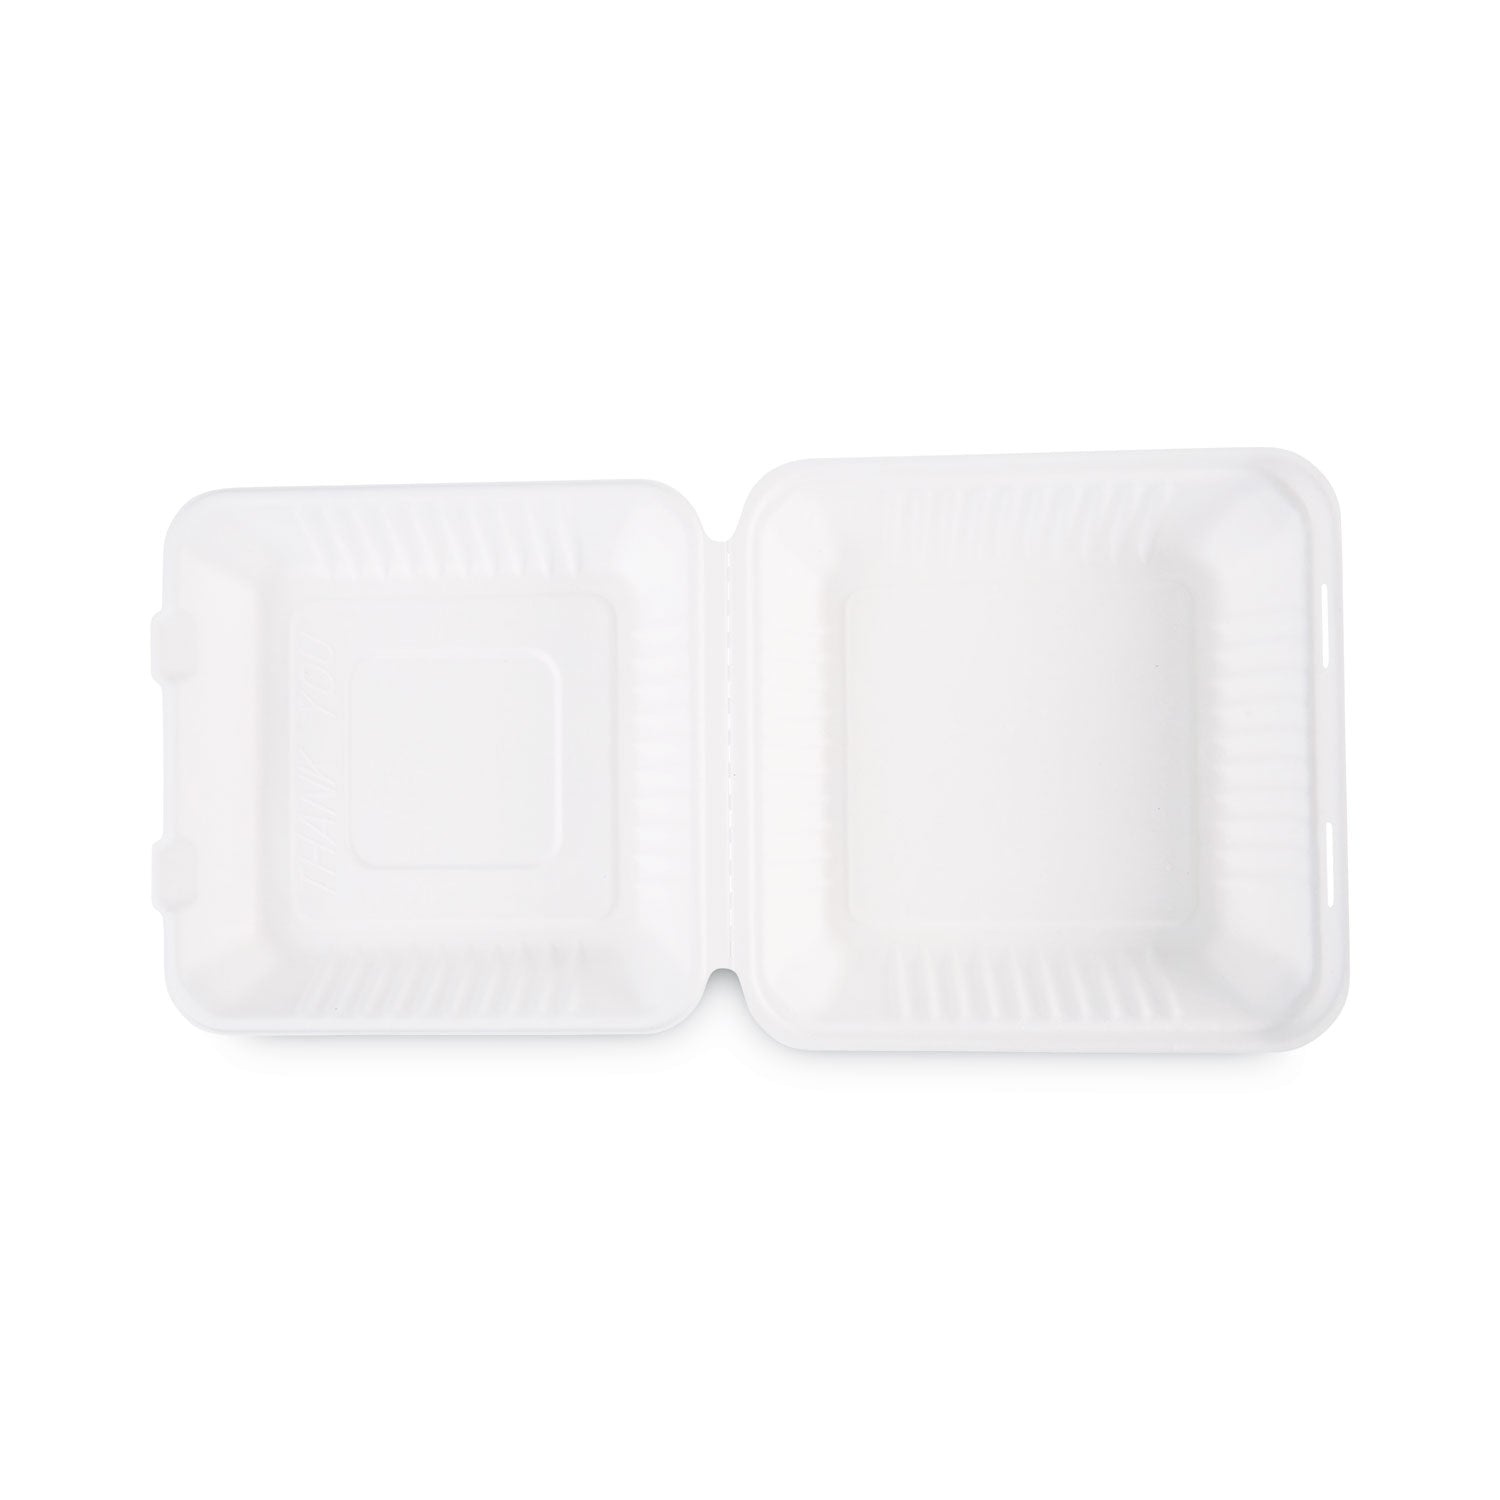 bagasse-food-containers-hinged-lid-1-compartment-9-x-9-x-319-white-sugarcane-100-sleeve-2-sleeves-carton_bwkhingewf1cm9 - 7